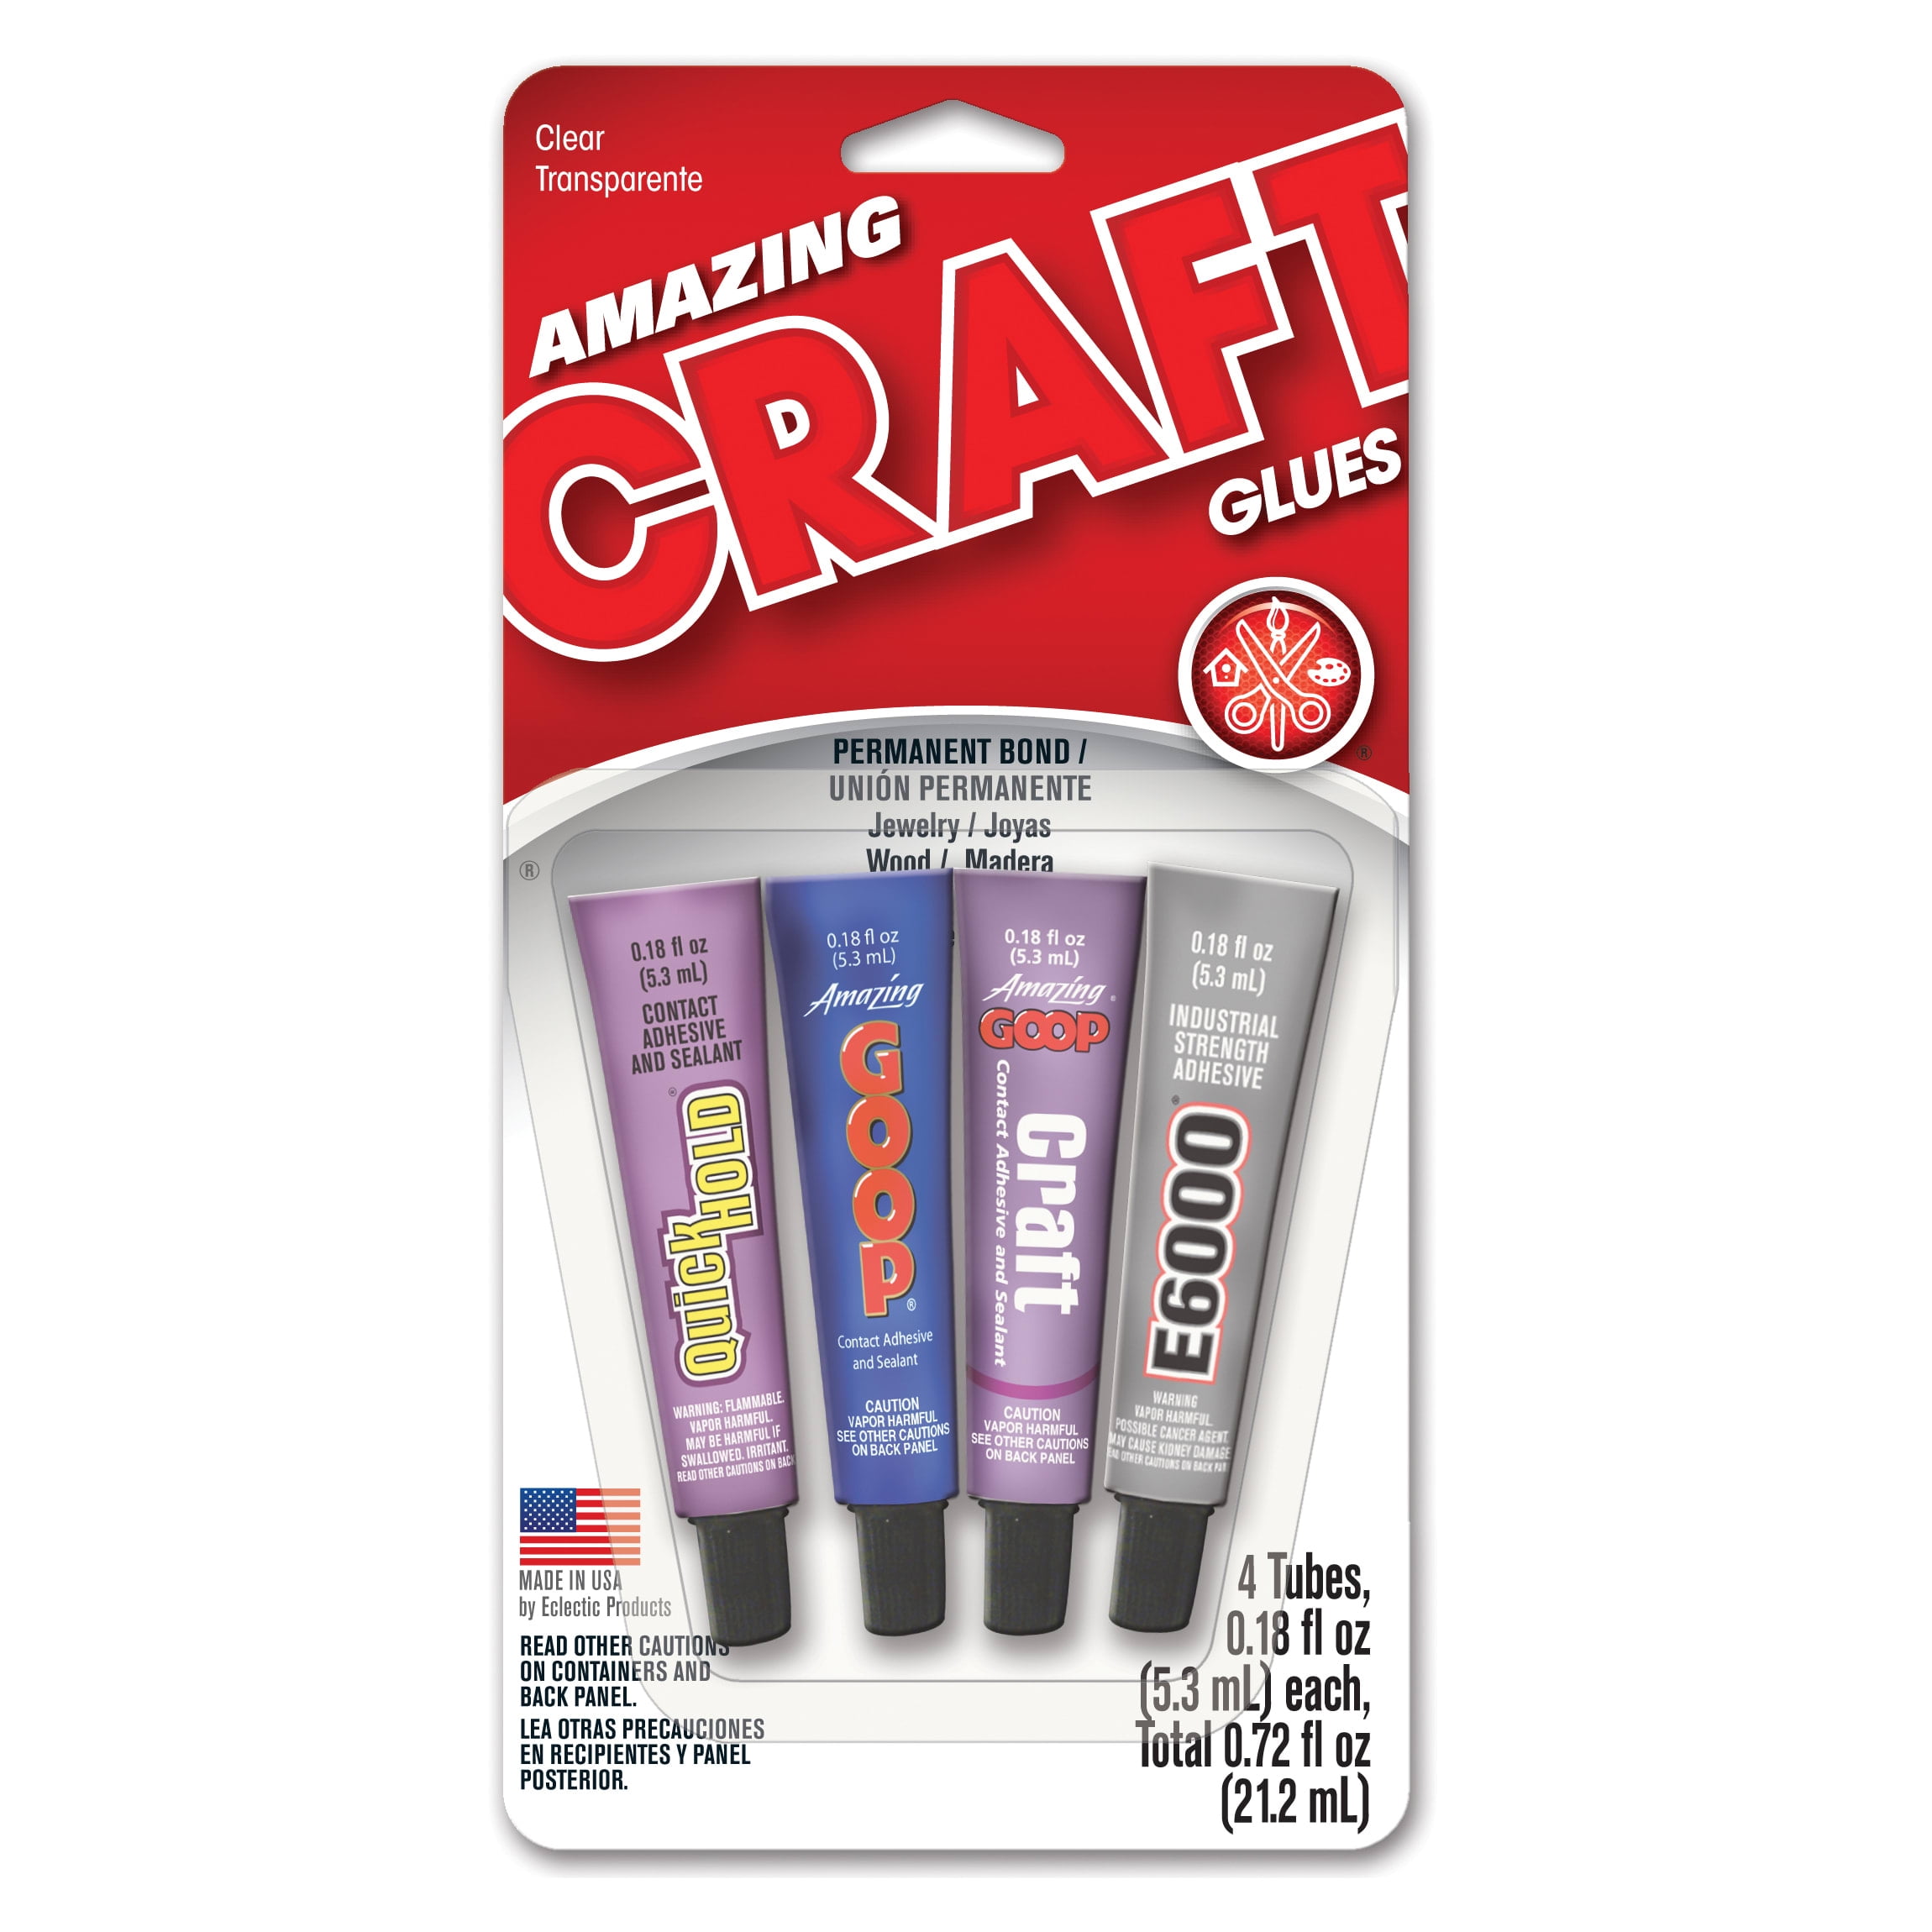 Eclectic E6000 Clear Craft Adhesive - 2 oz tube